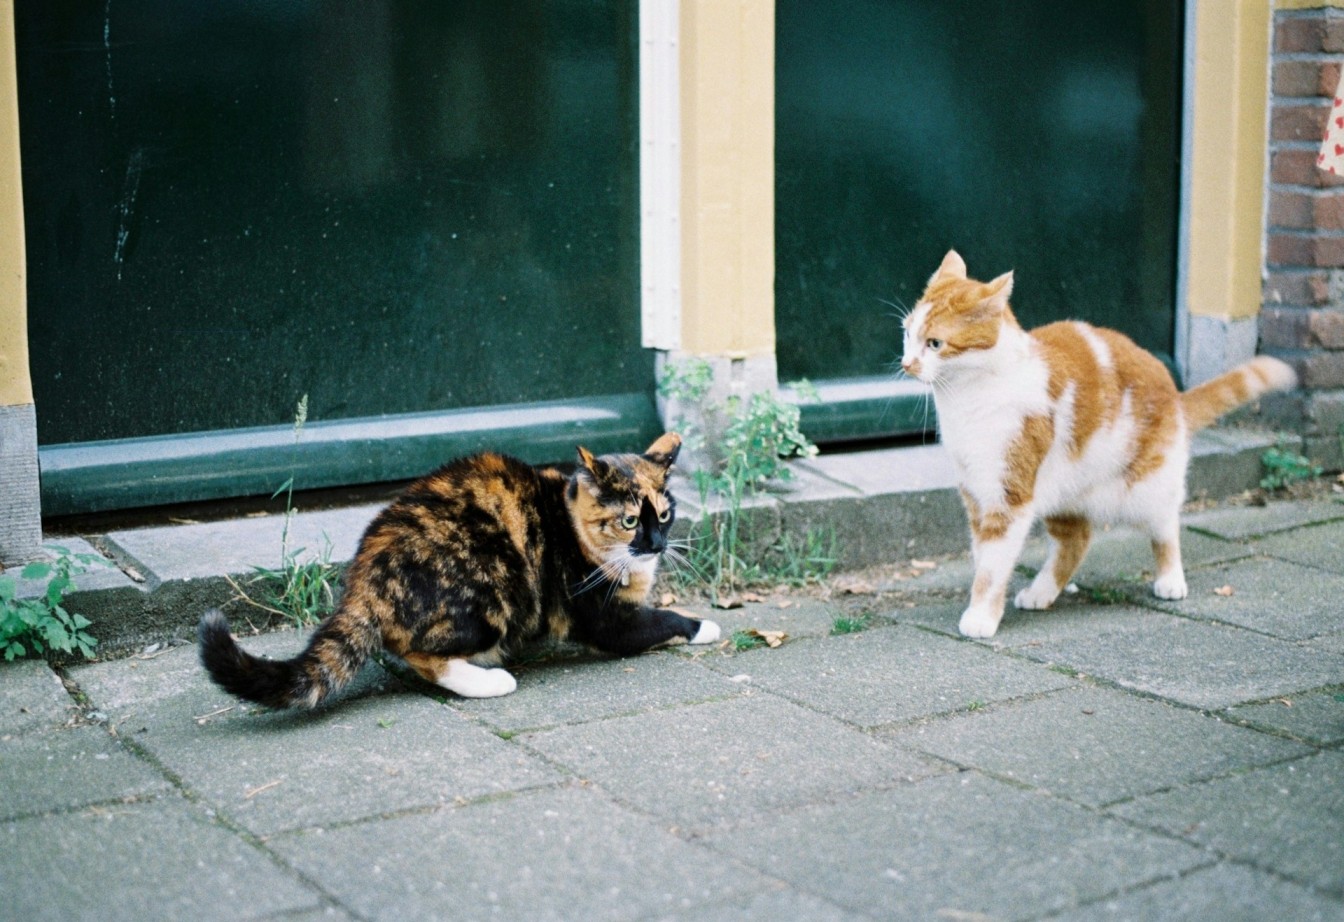 Two outdoor cats facing off each other outside a house